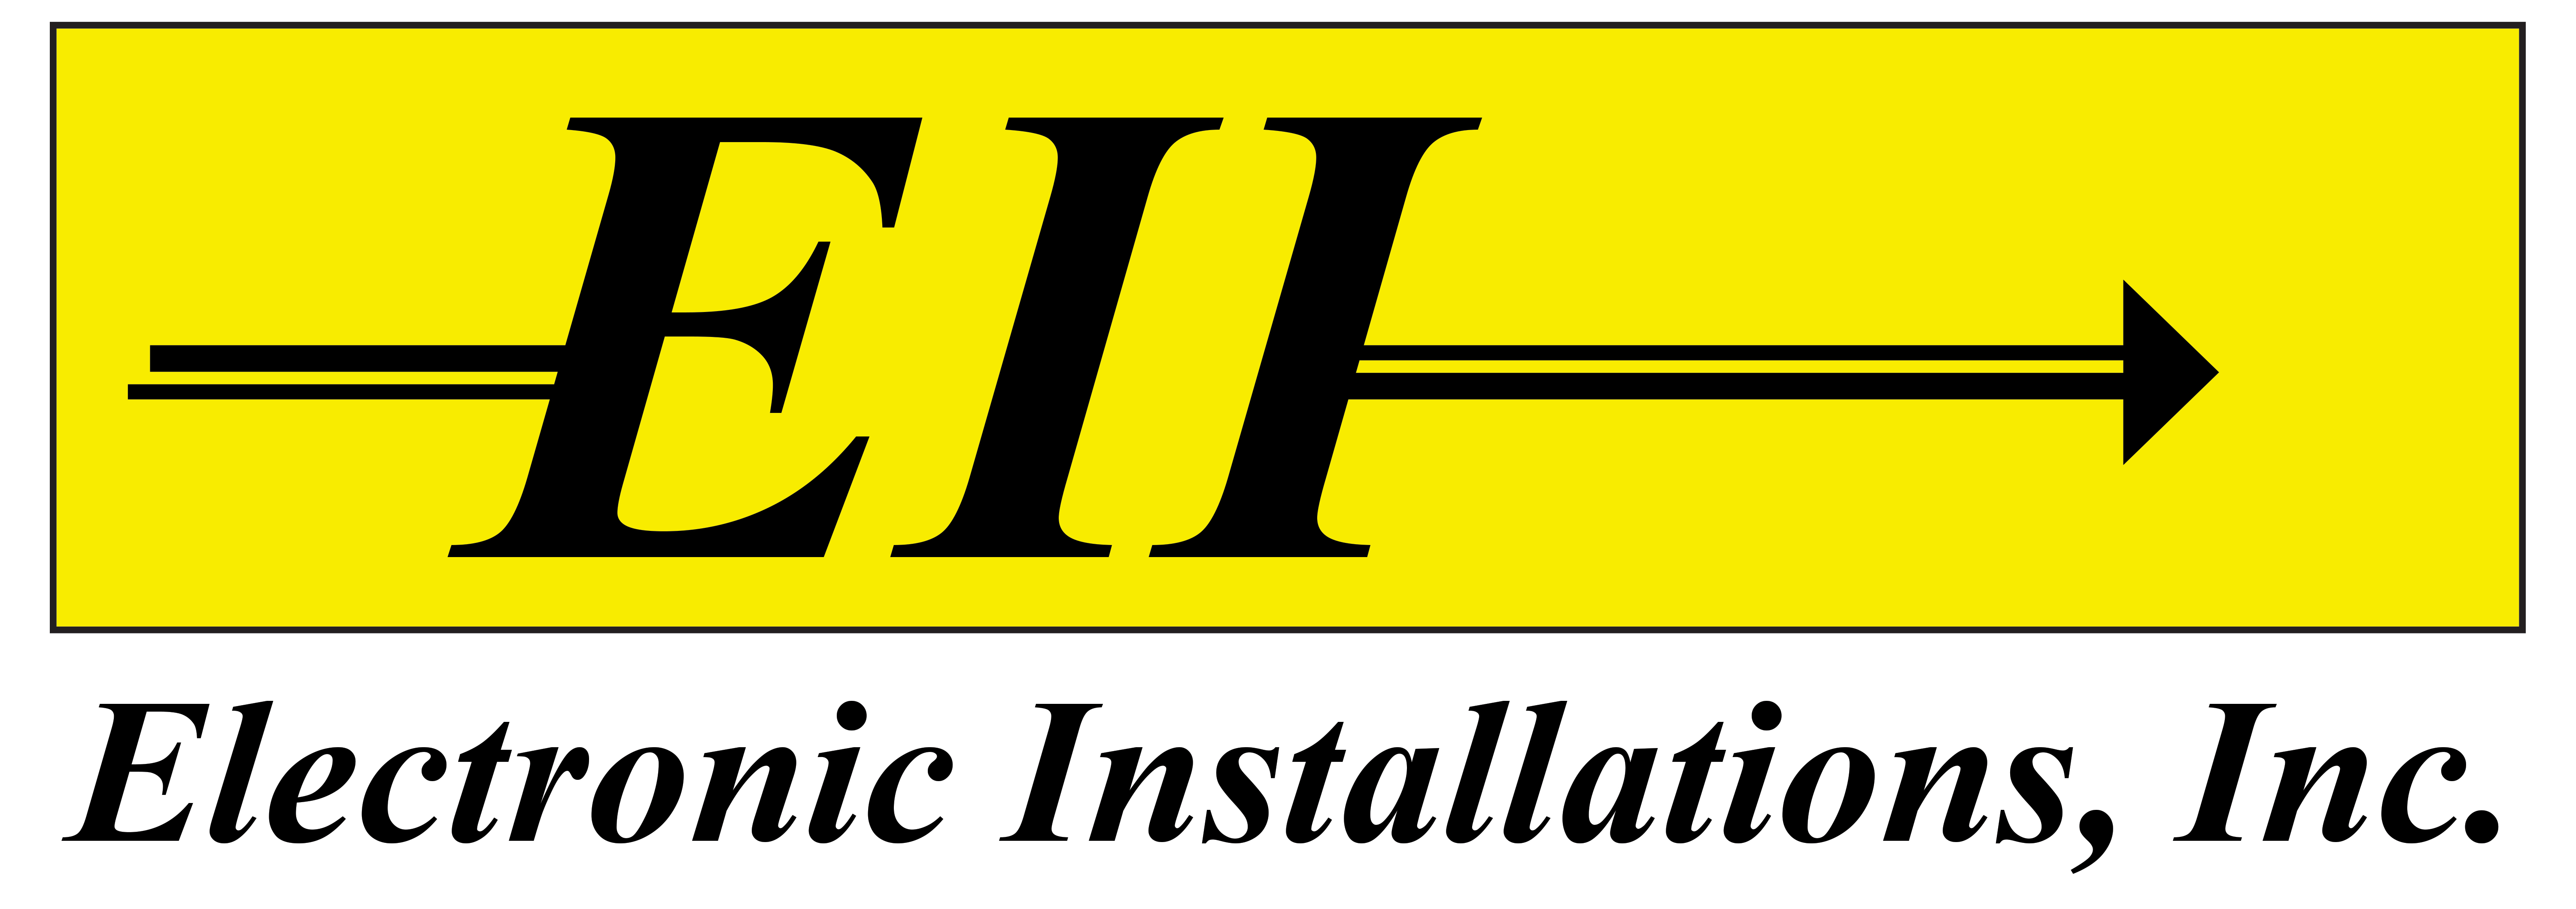 Electronic Installations, Inc.